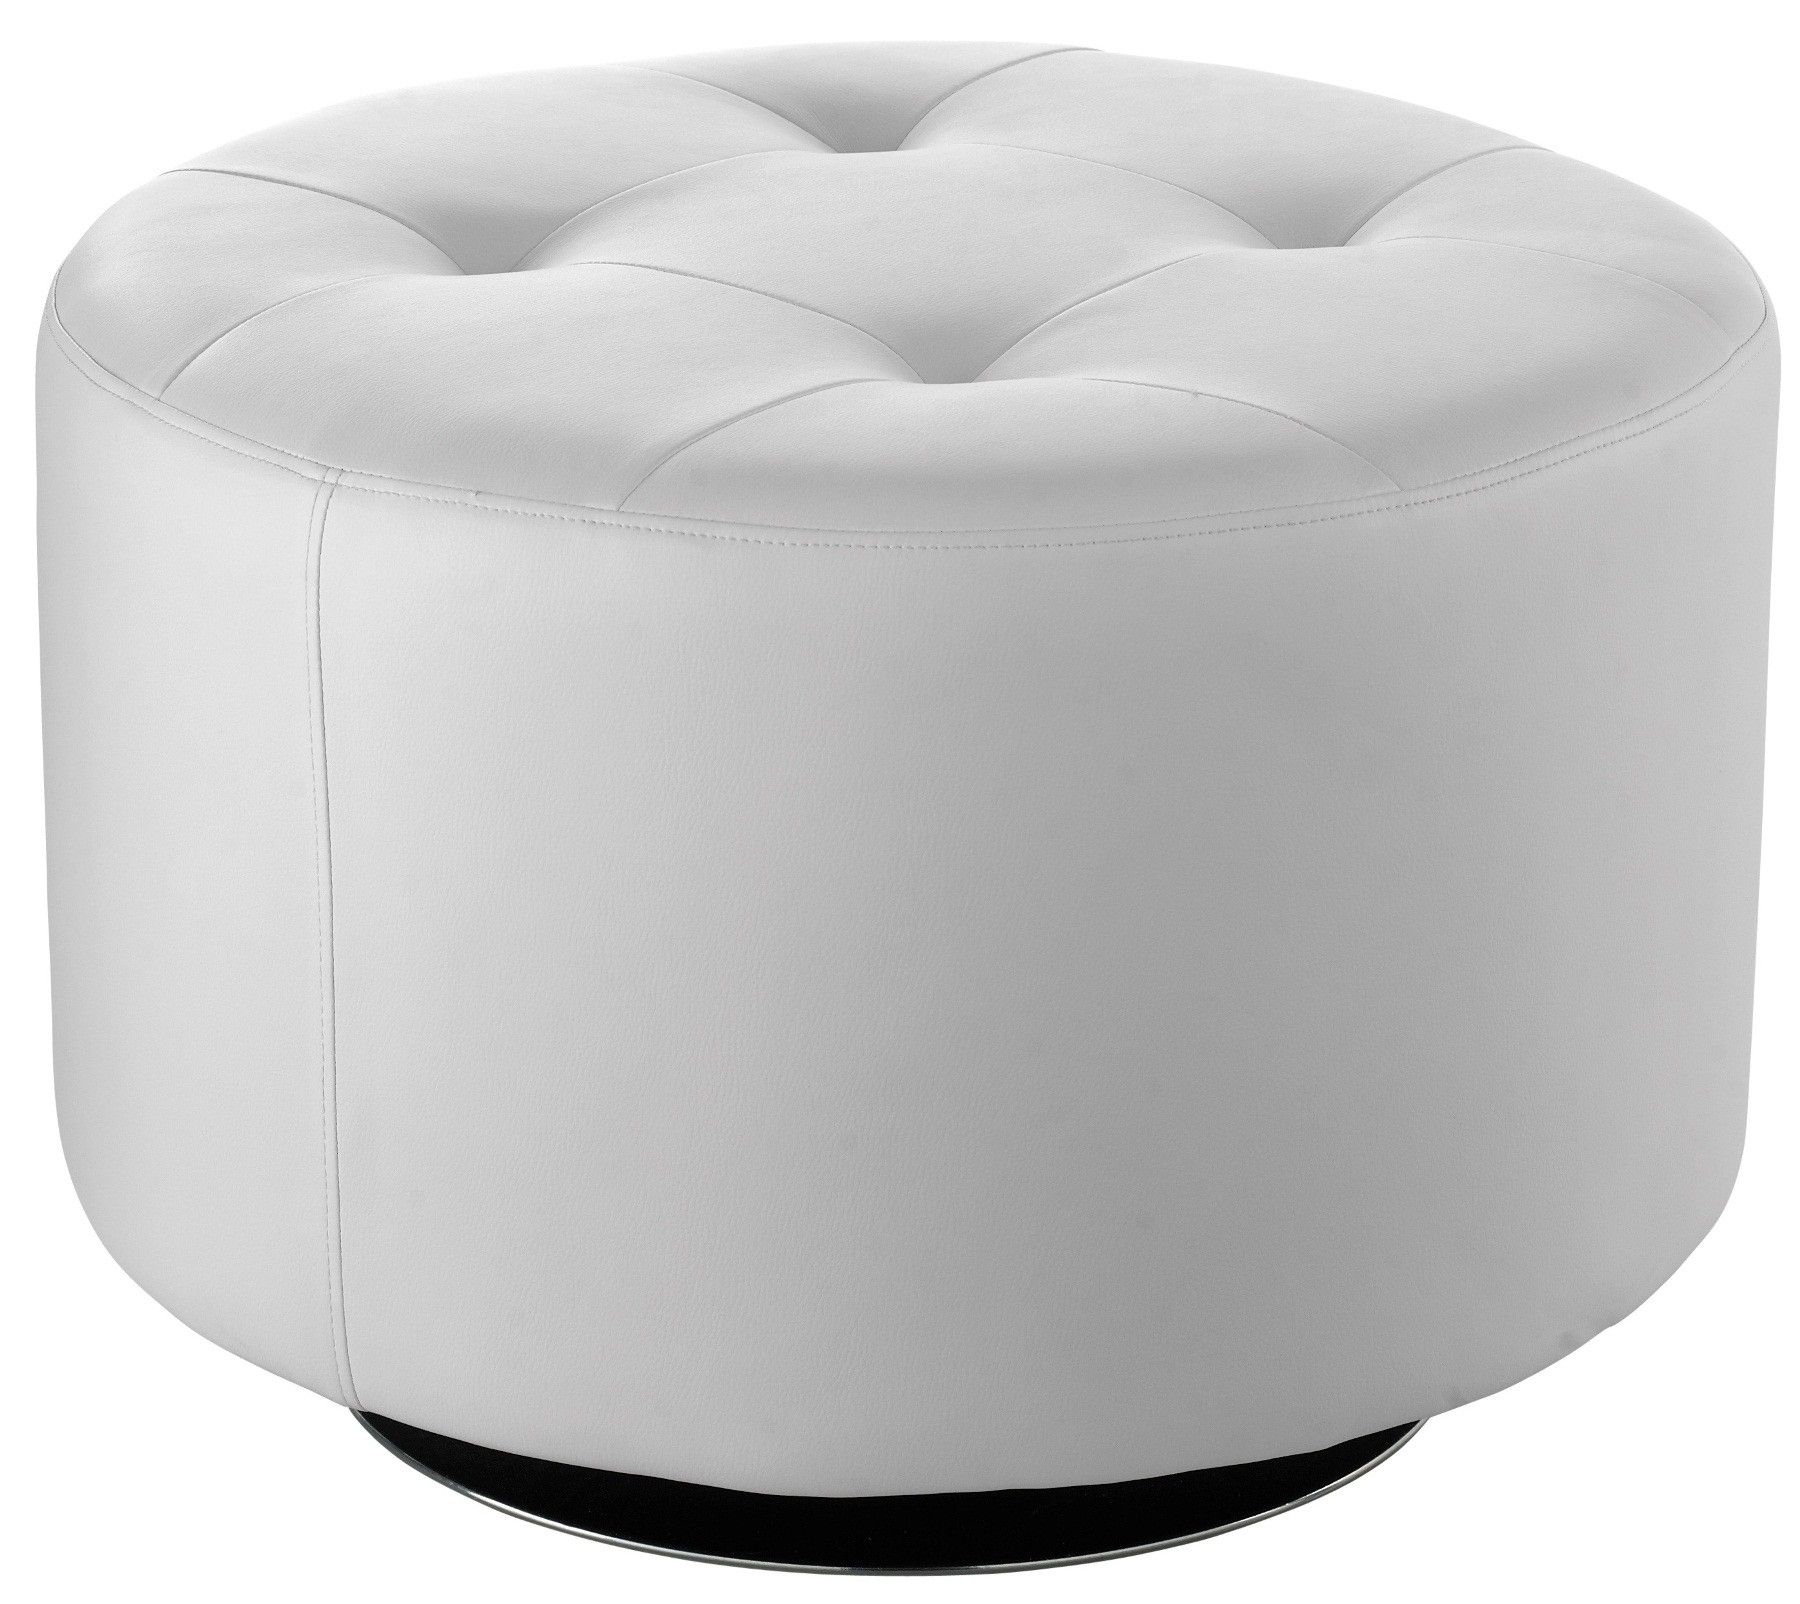 Domani White Large Swivel Ottoman From Sunpan (11006) | Coleman Furniture Within White Large Round Ottomans (View 15 of 20)